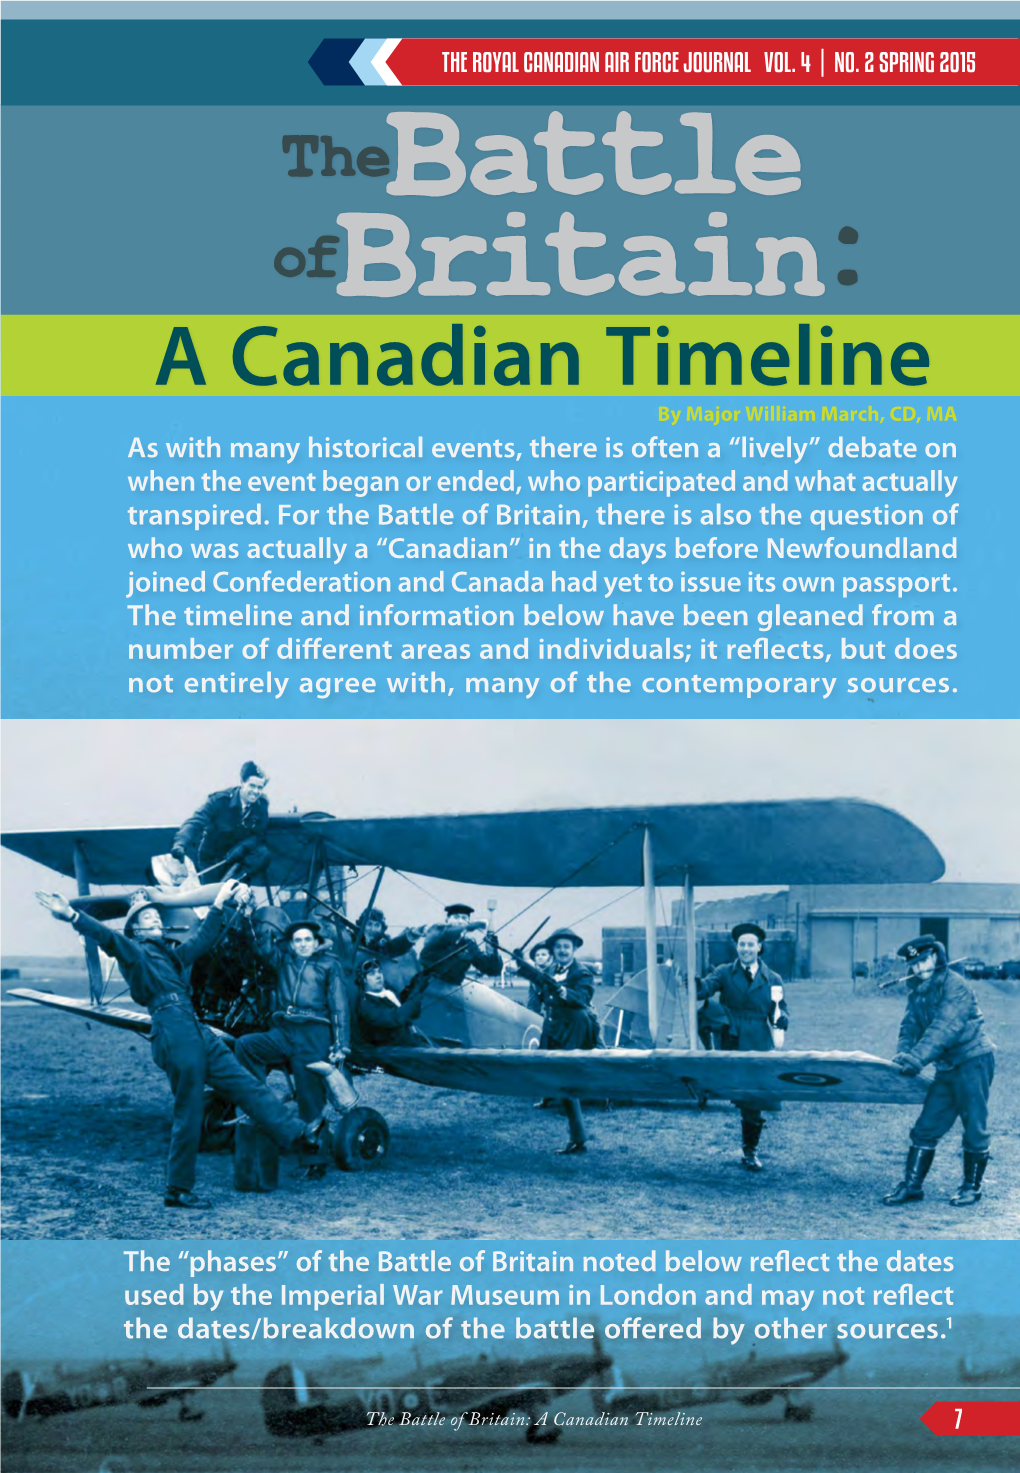 The Battle of Britain: a Canadian Timeline 7 the ROYAL CANADIAN AIR FORCE JOURNAL VOL